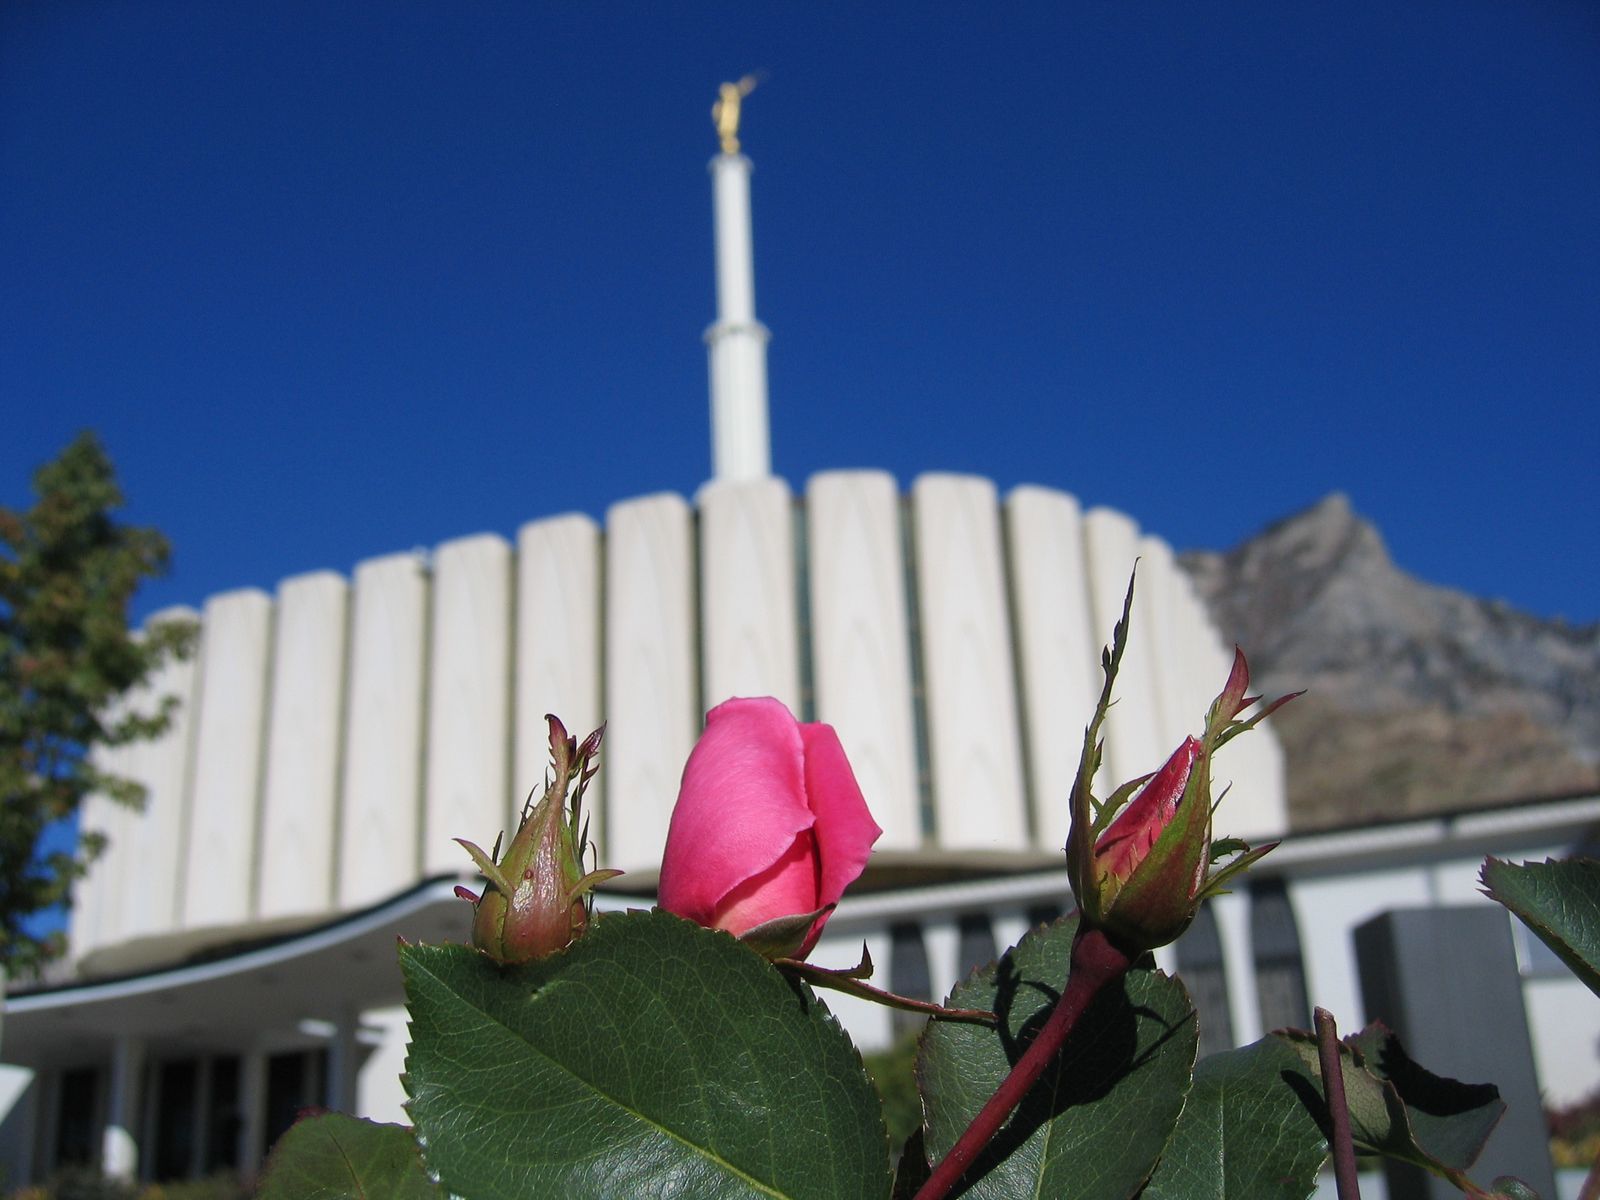 Buds at the Provo Temple